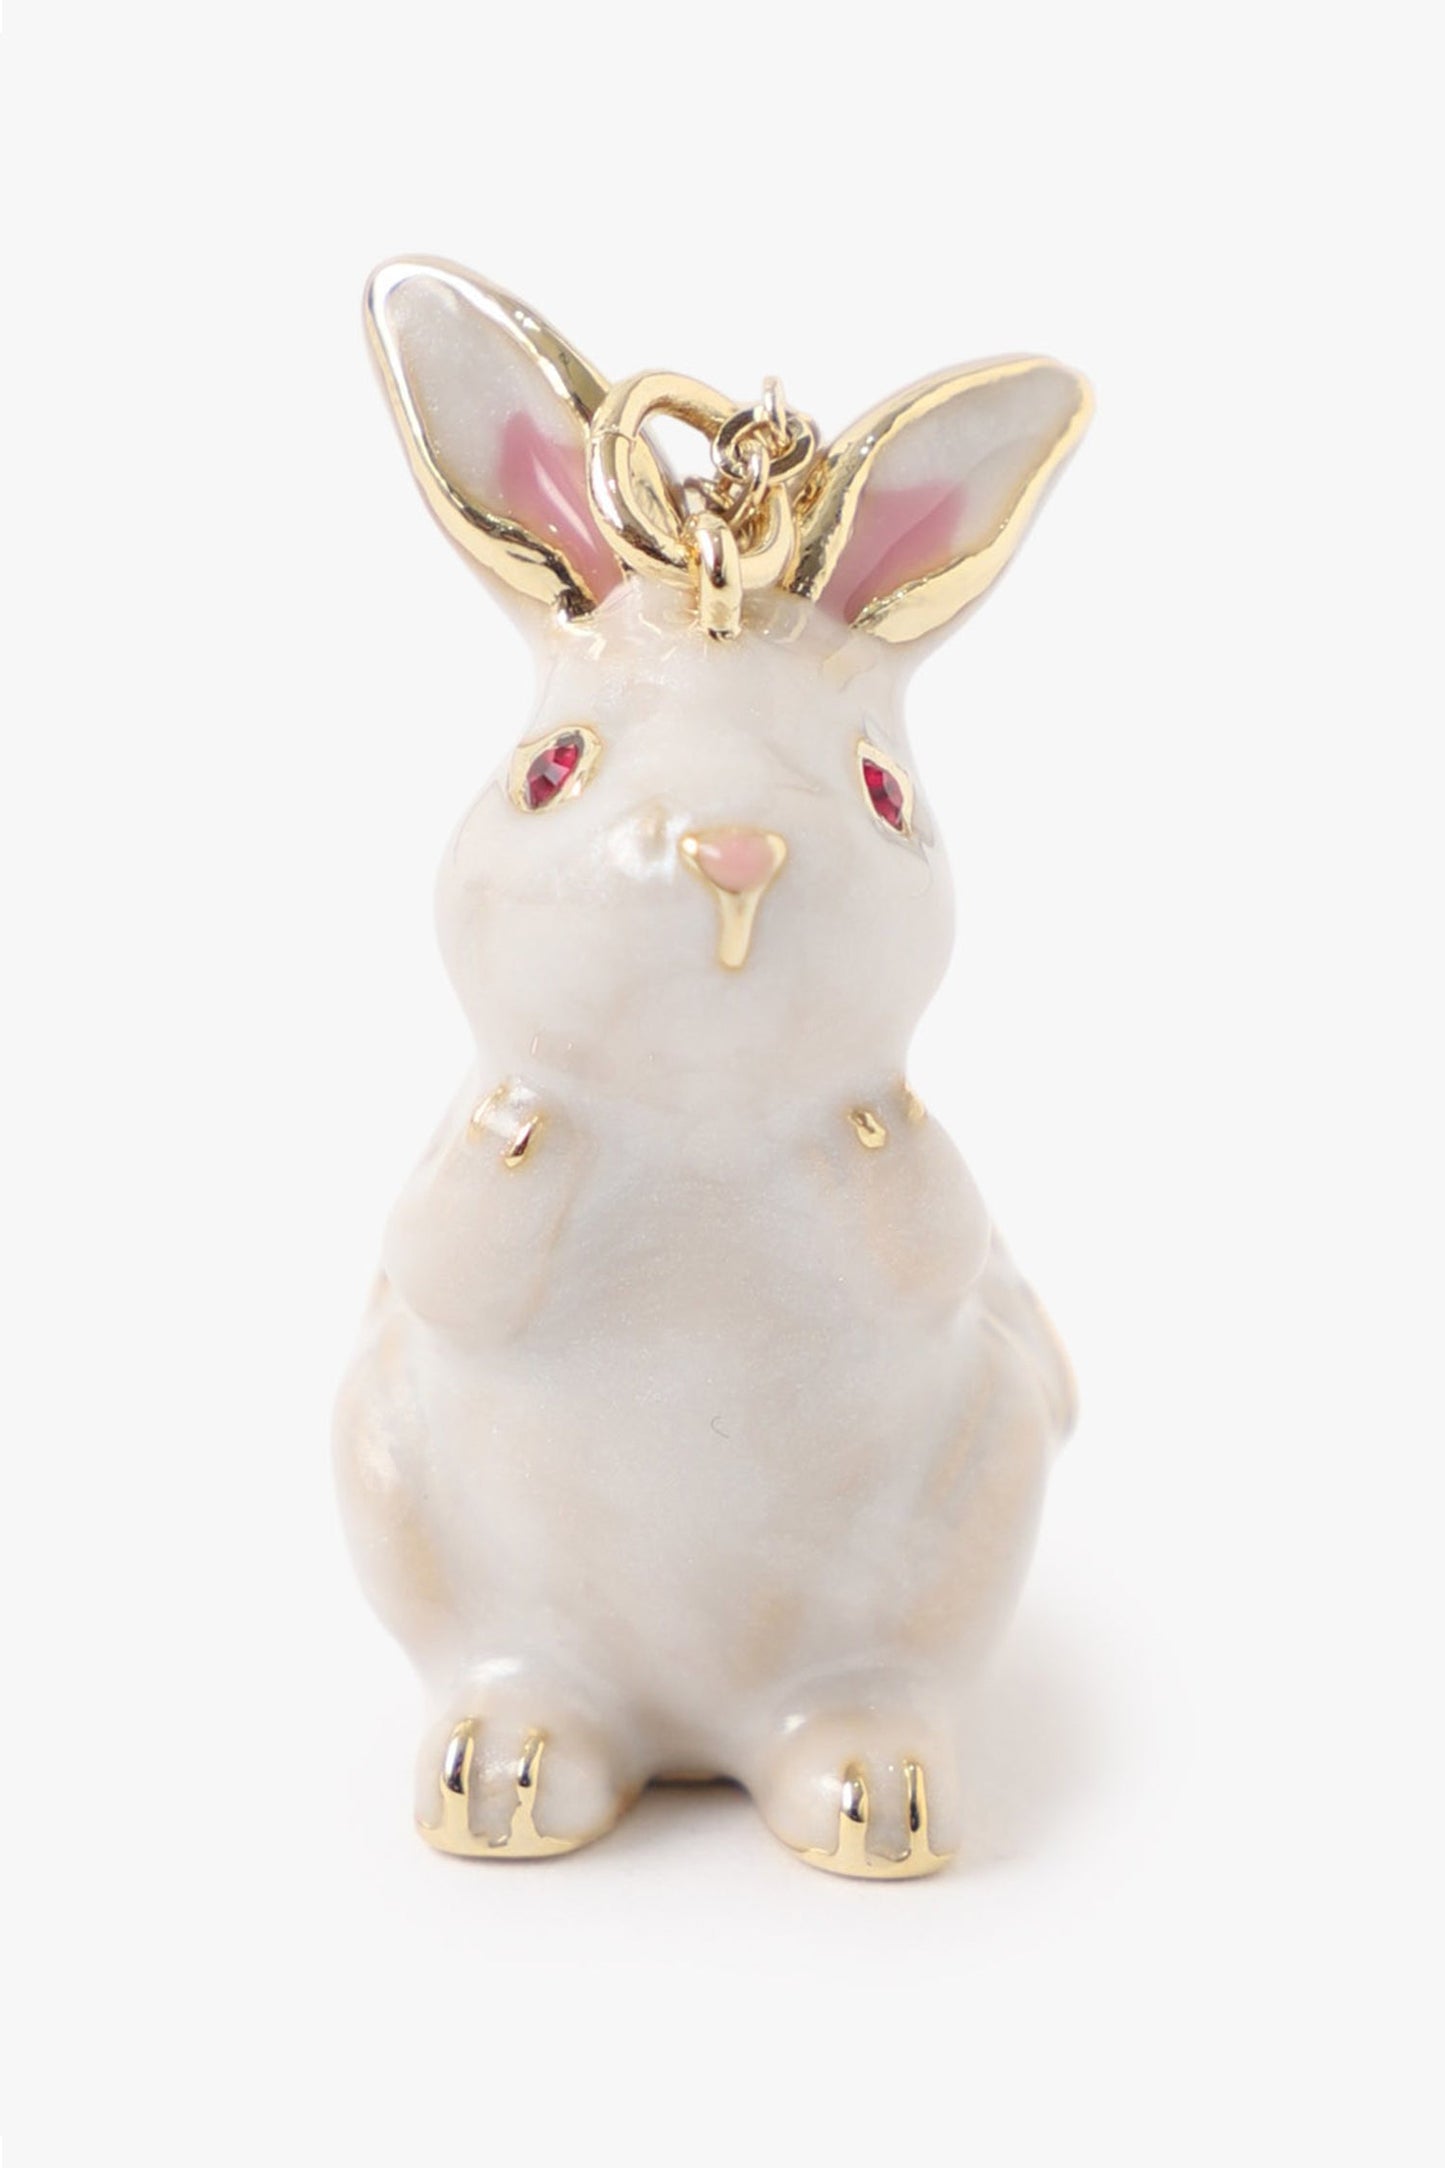 Rabbit in white, jeweled red eyes, golden details on ears, nose, head, golden kook on head